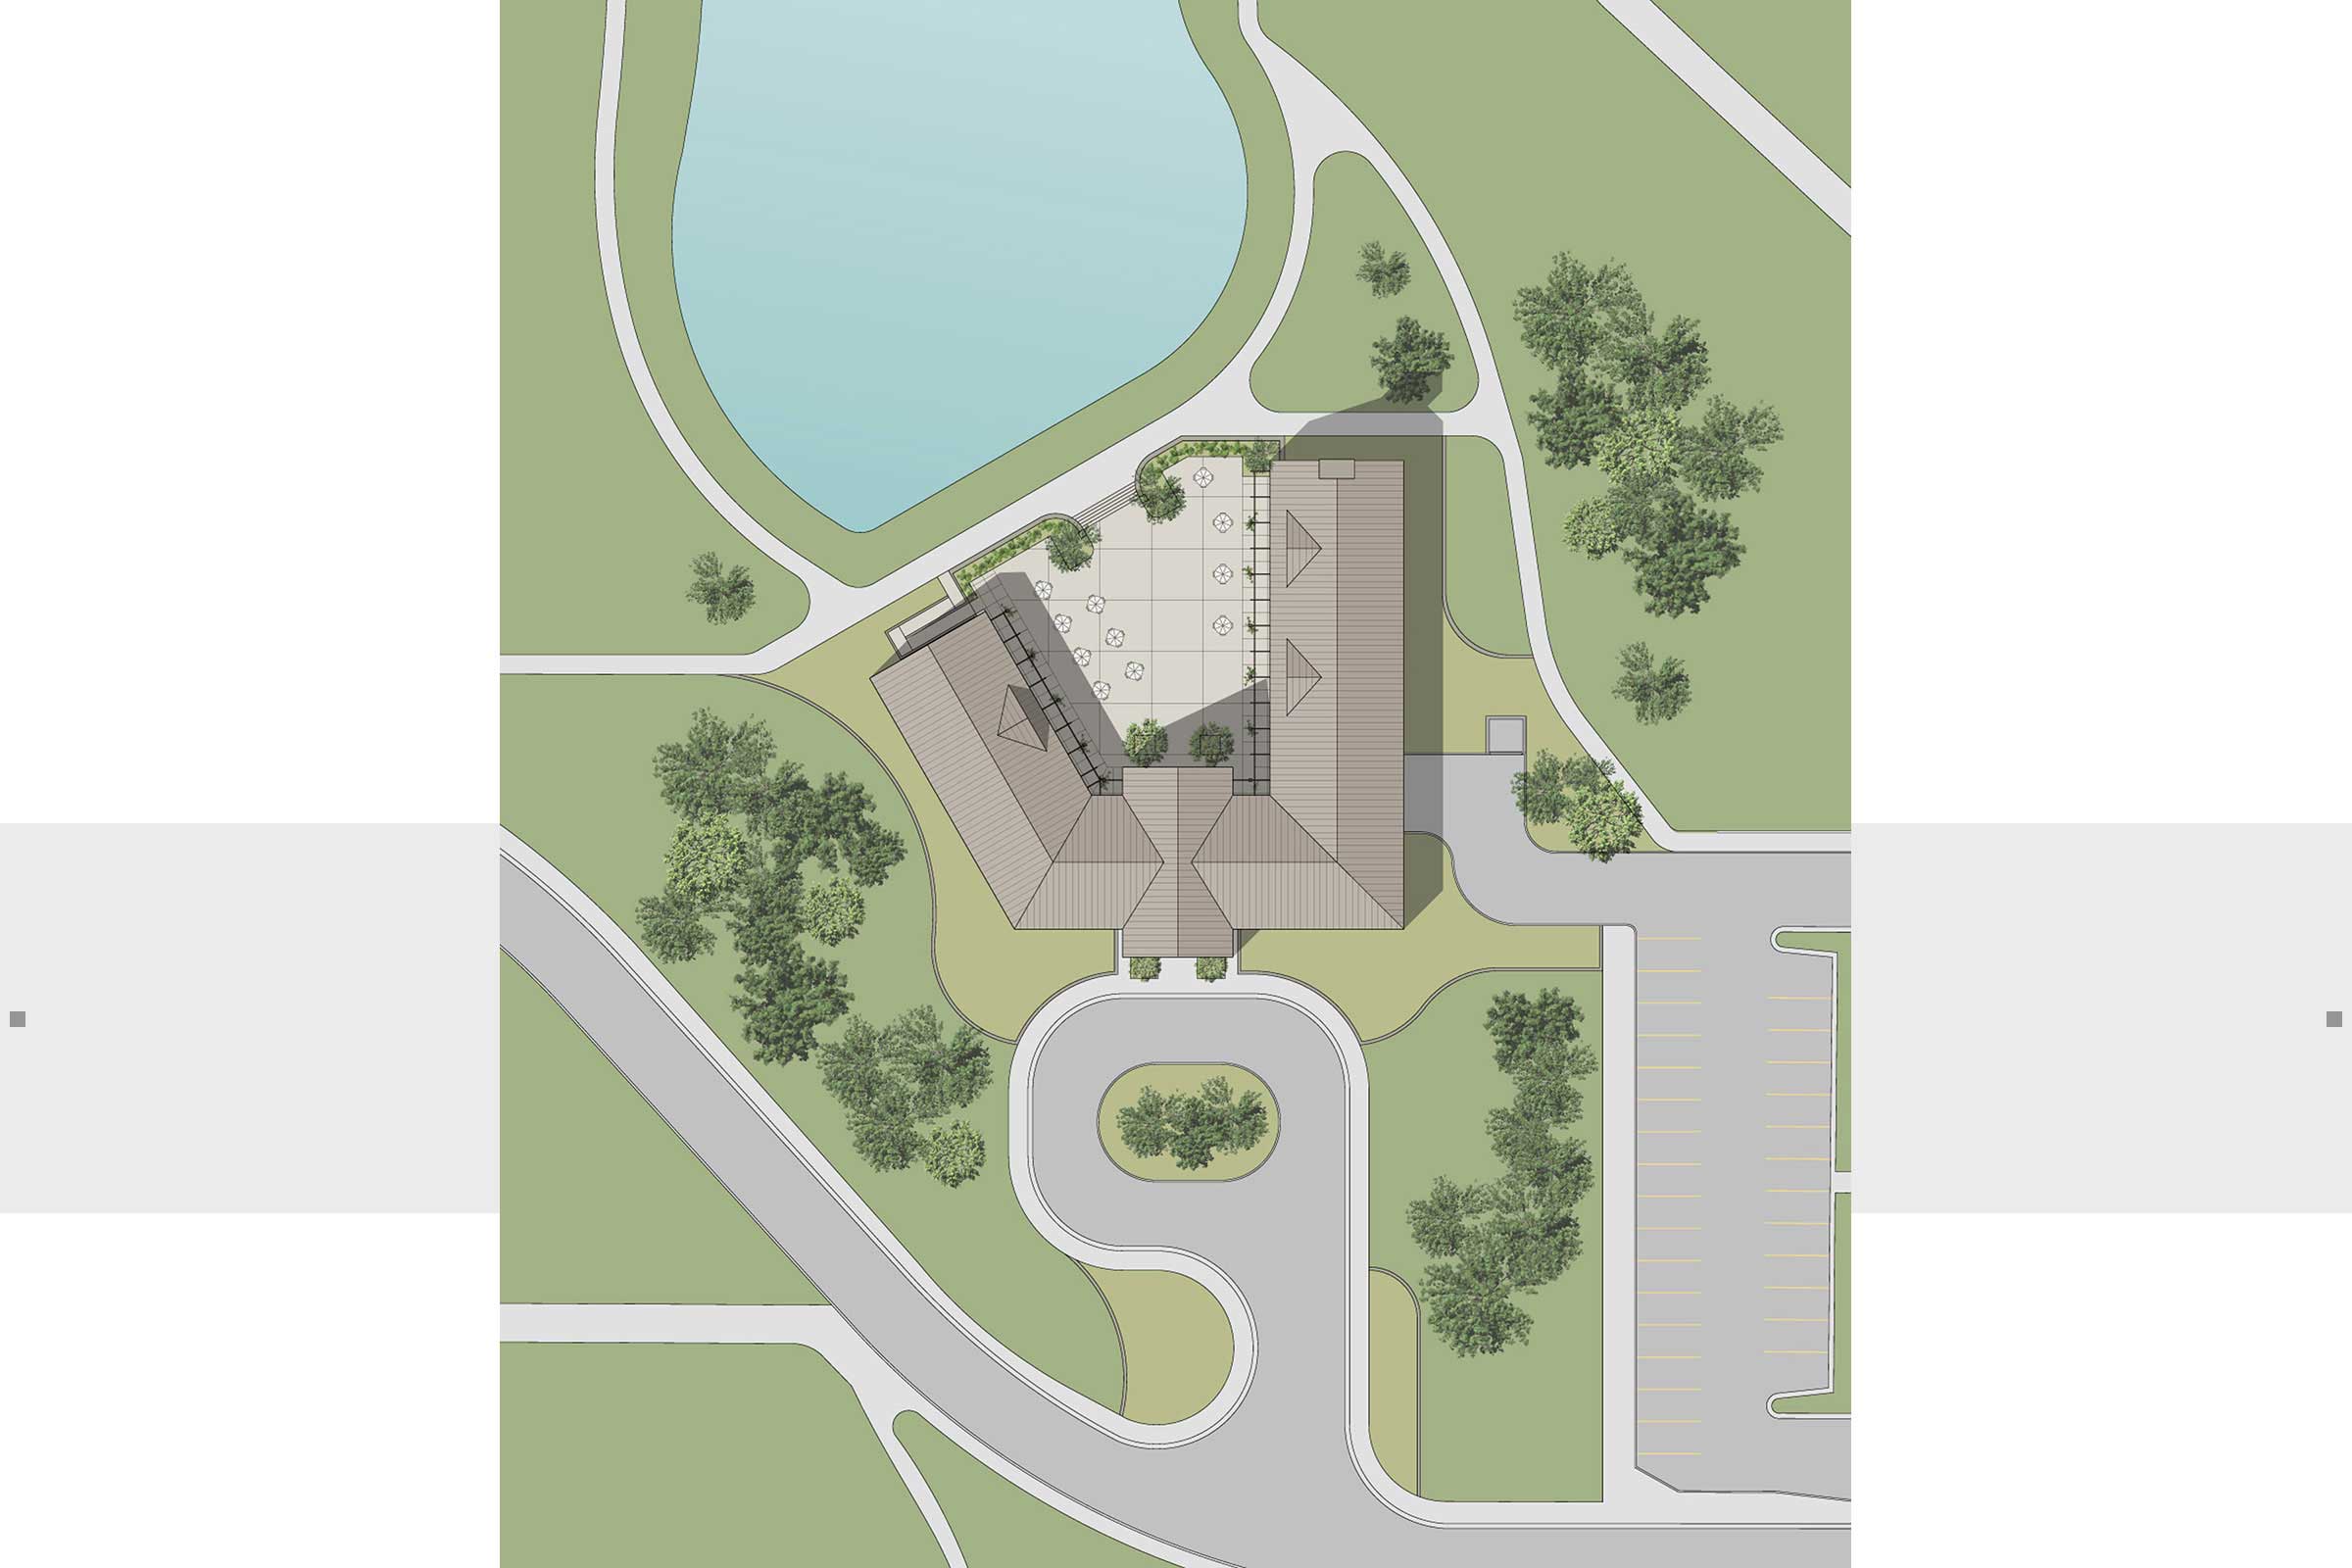 CSU rendered property layout with pond and parking